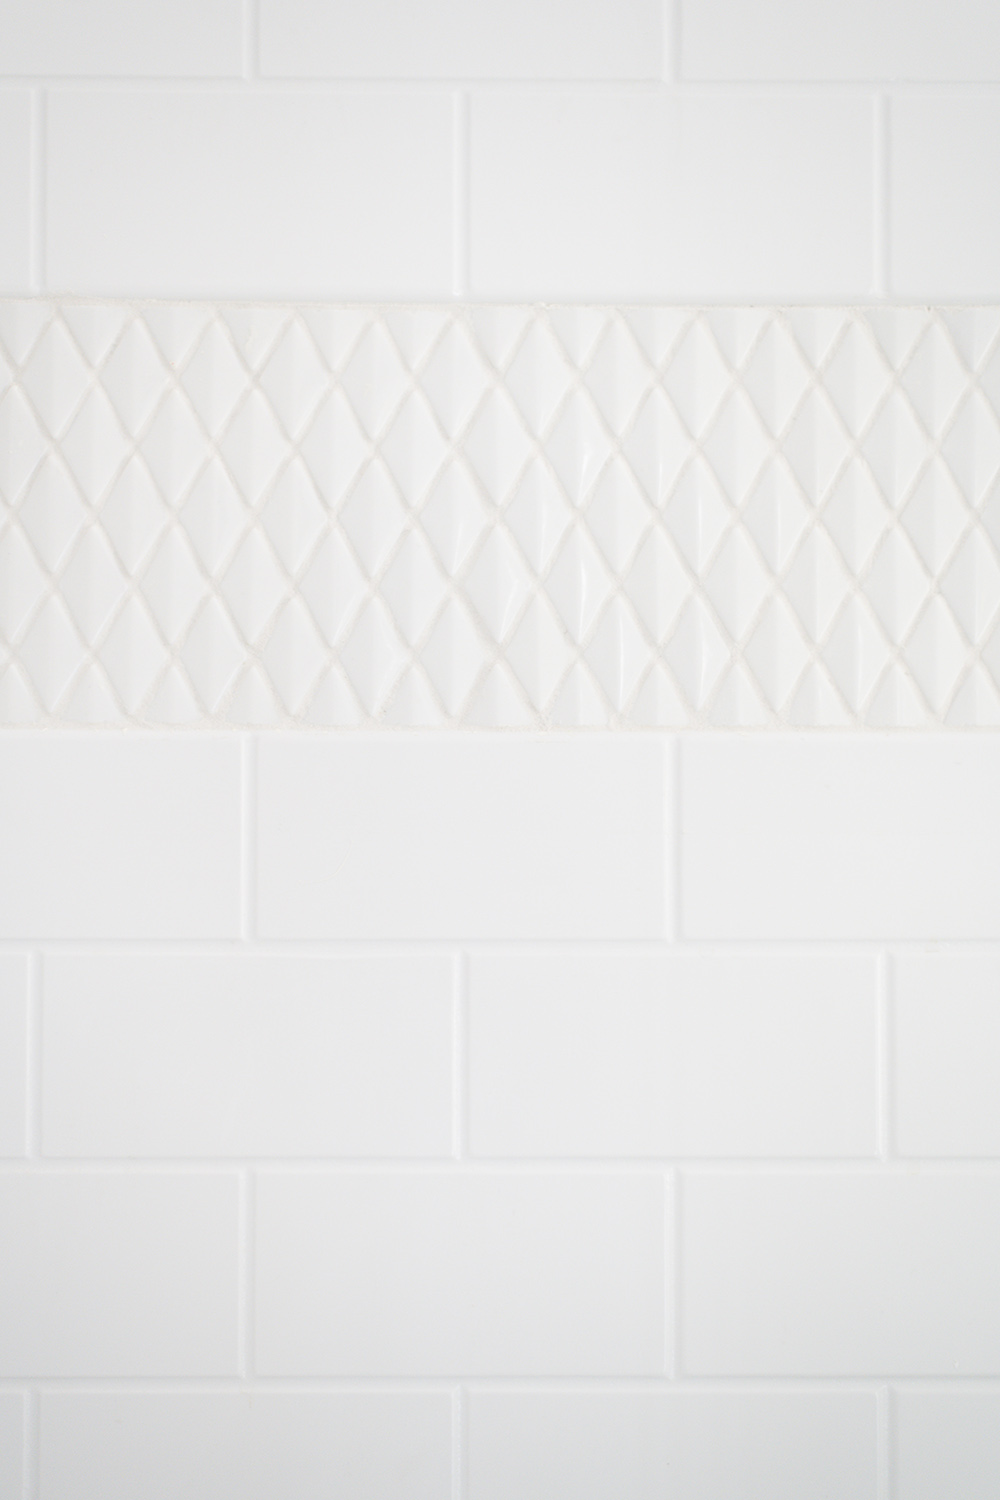 A white shower surround with white tile.